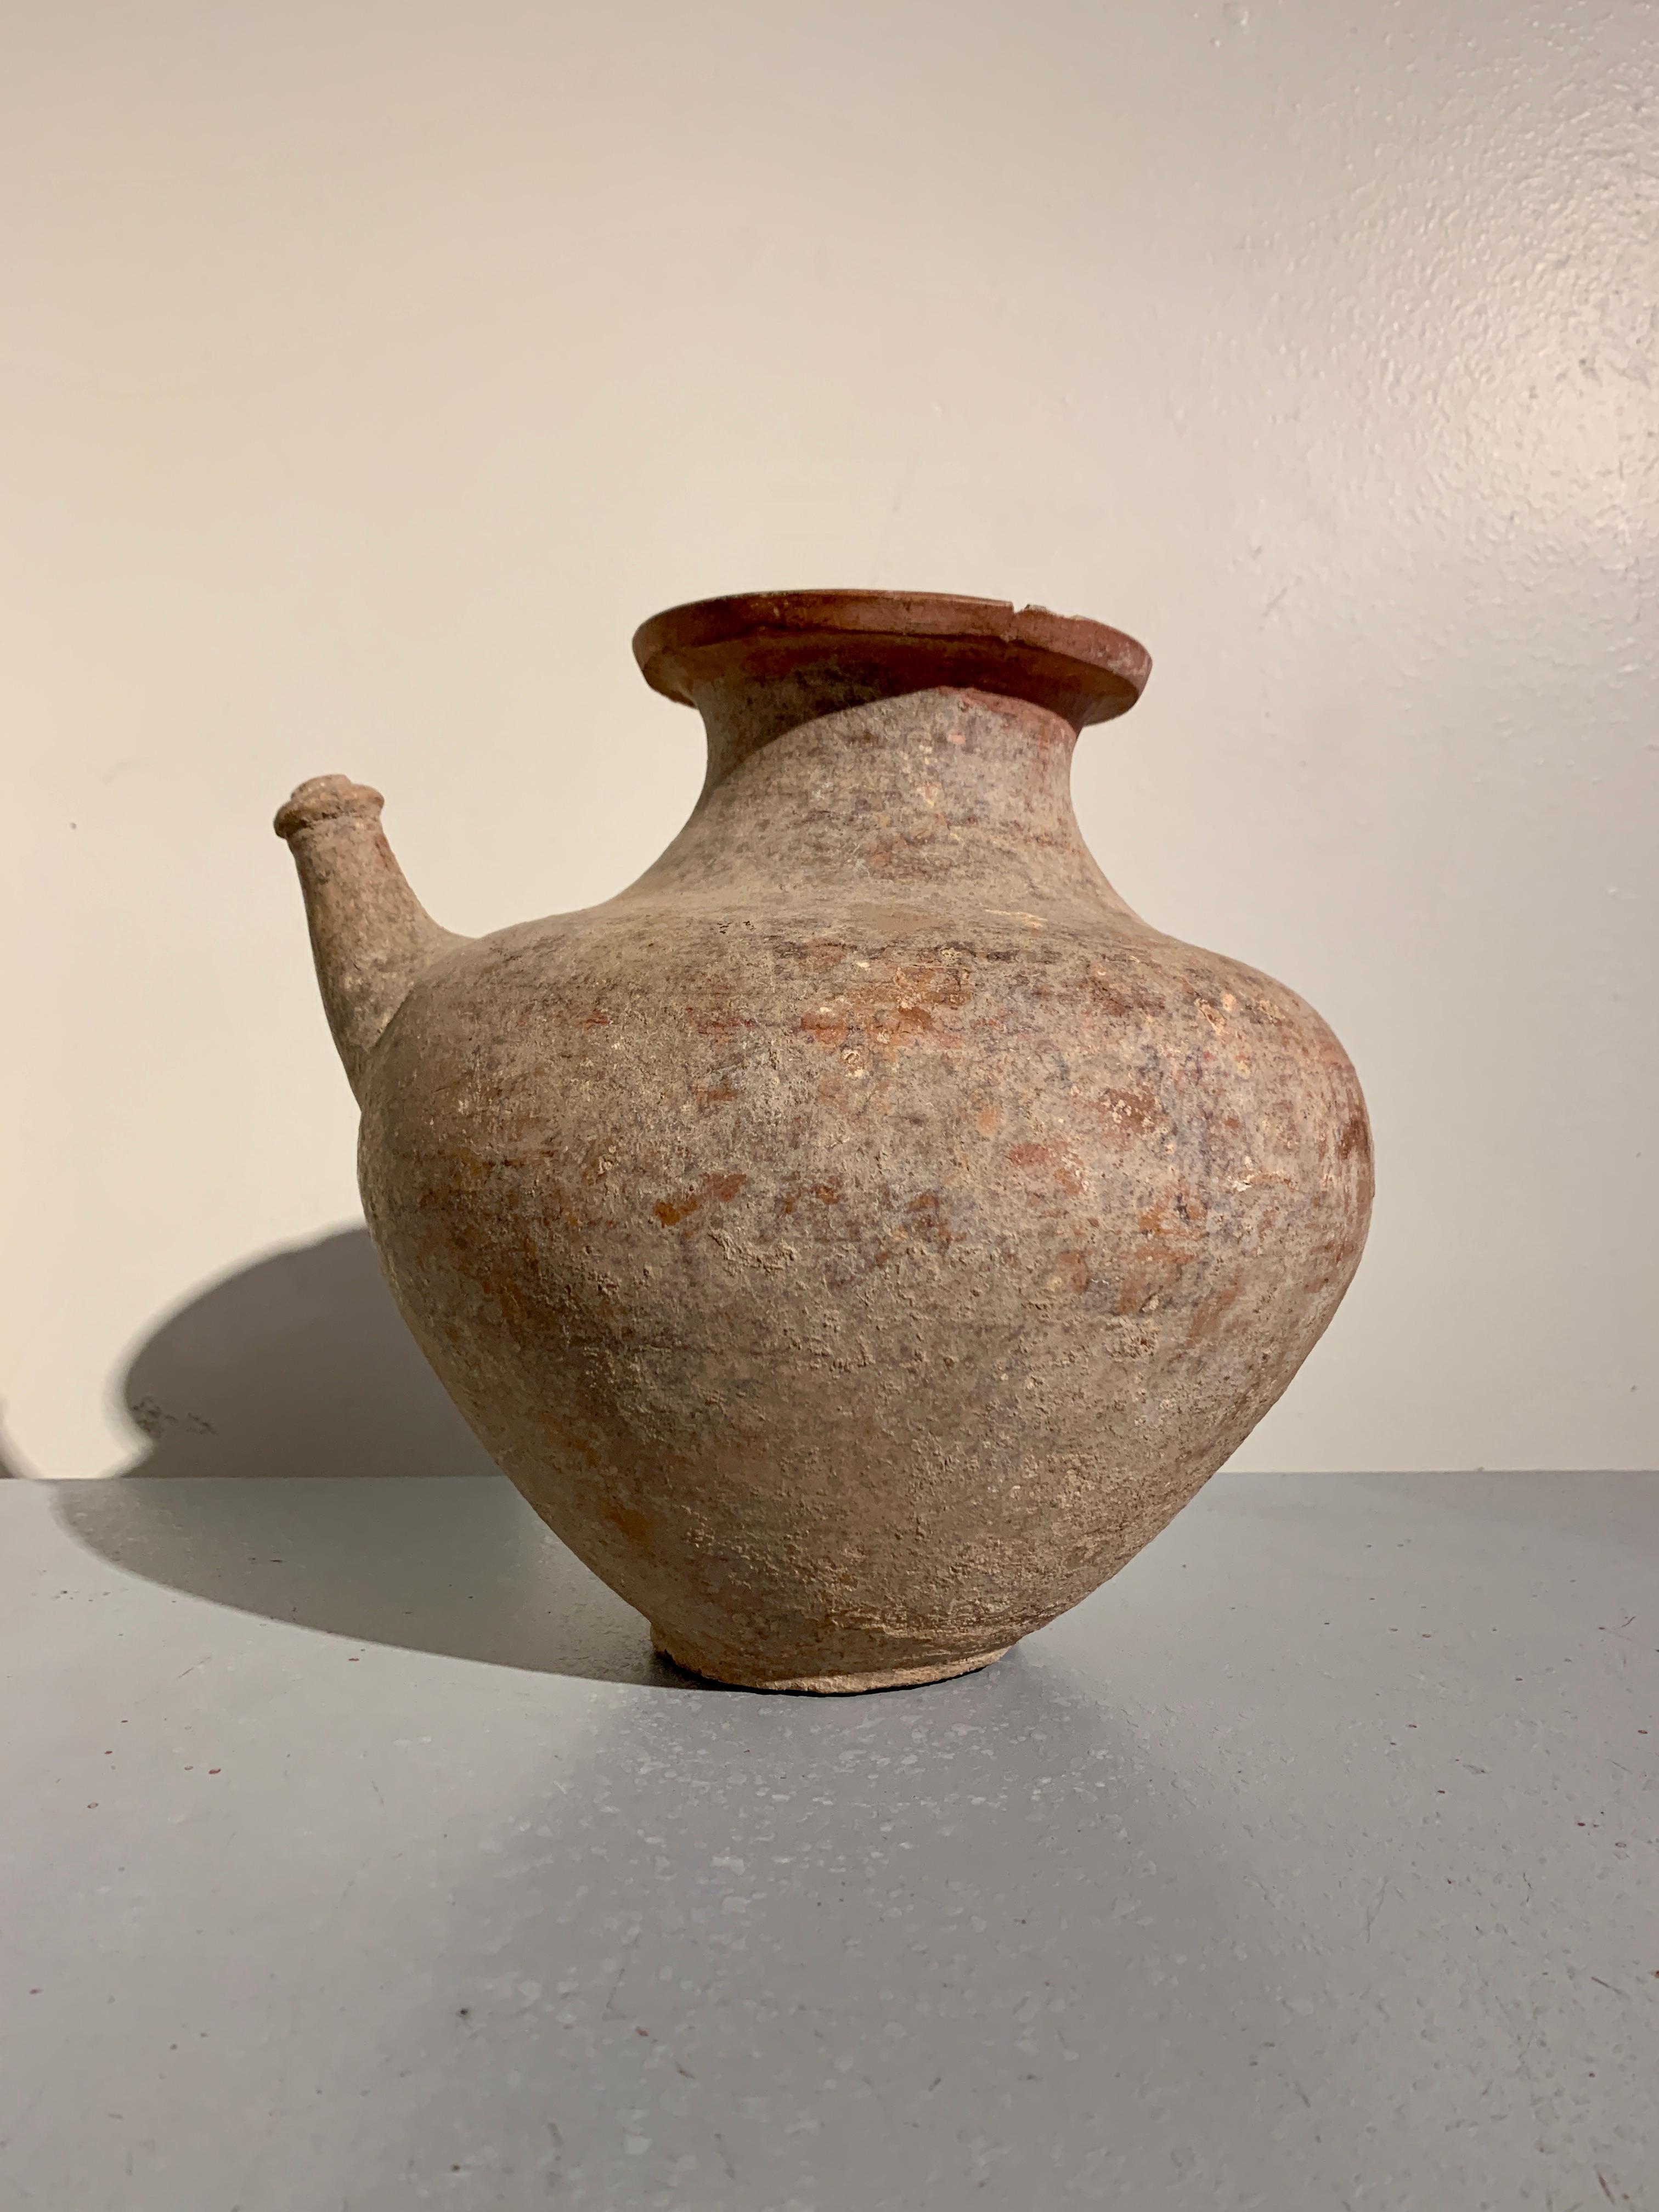 A large and attractive pre-Khmer red pottery kendi, pouring vessel, 6th - 8th century, Cambodia. 

The large vessel crafted of a red pottery, with a wide, globular body resting on a narrow, round, flat bottomed foot. A short, tapering neck rises